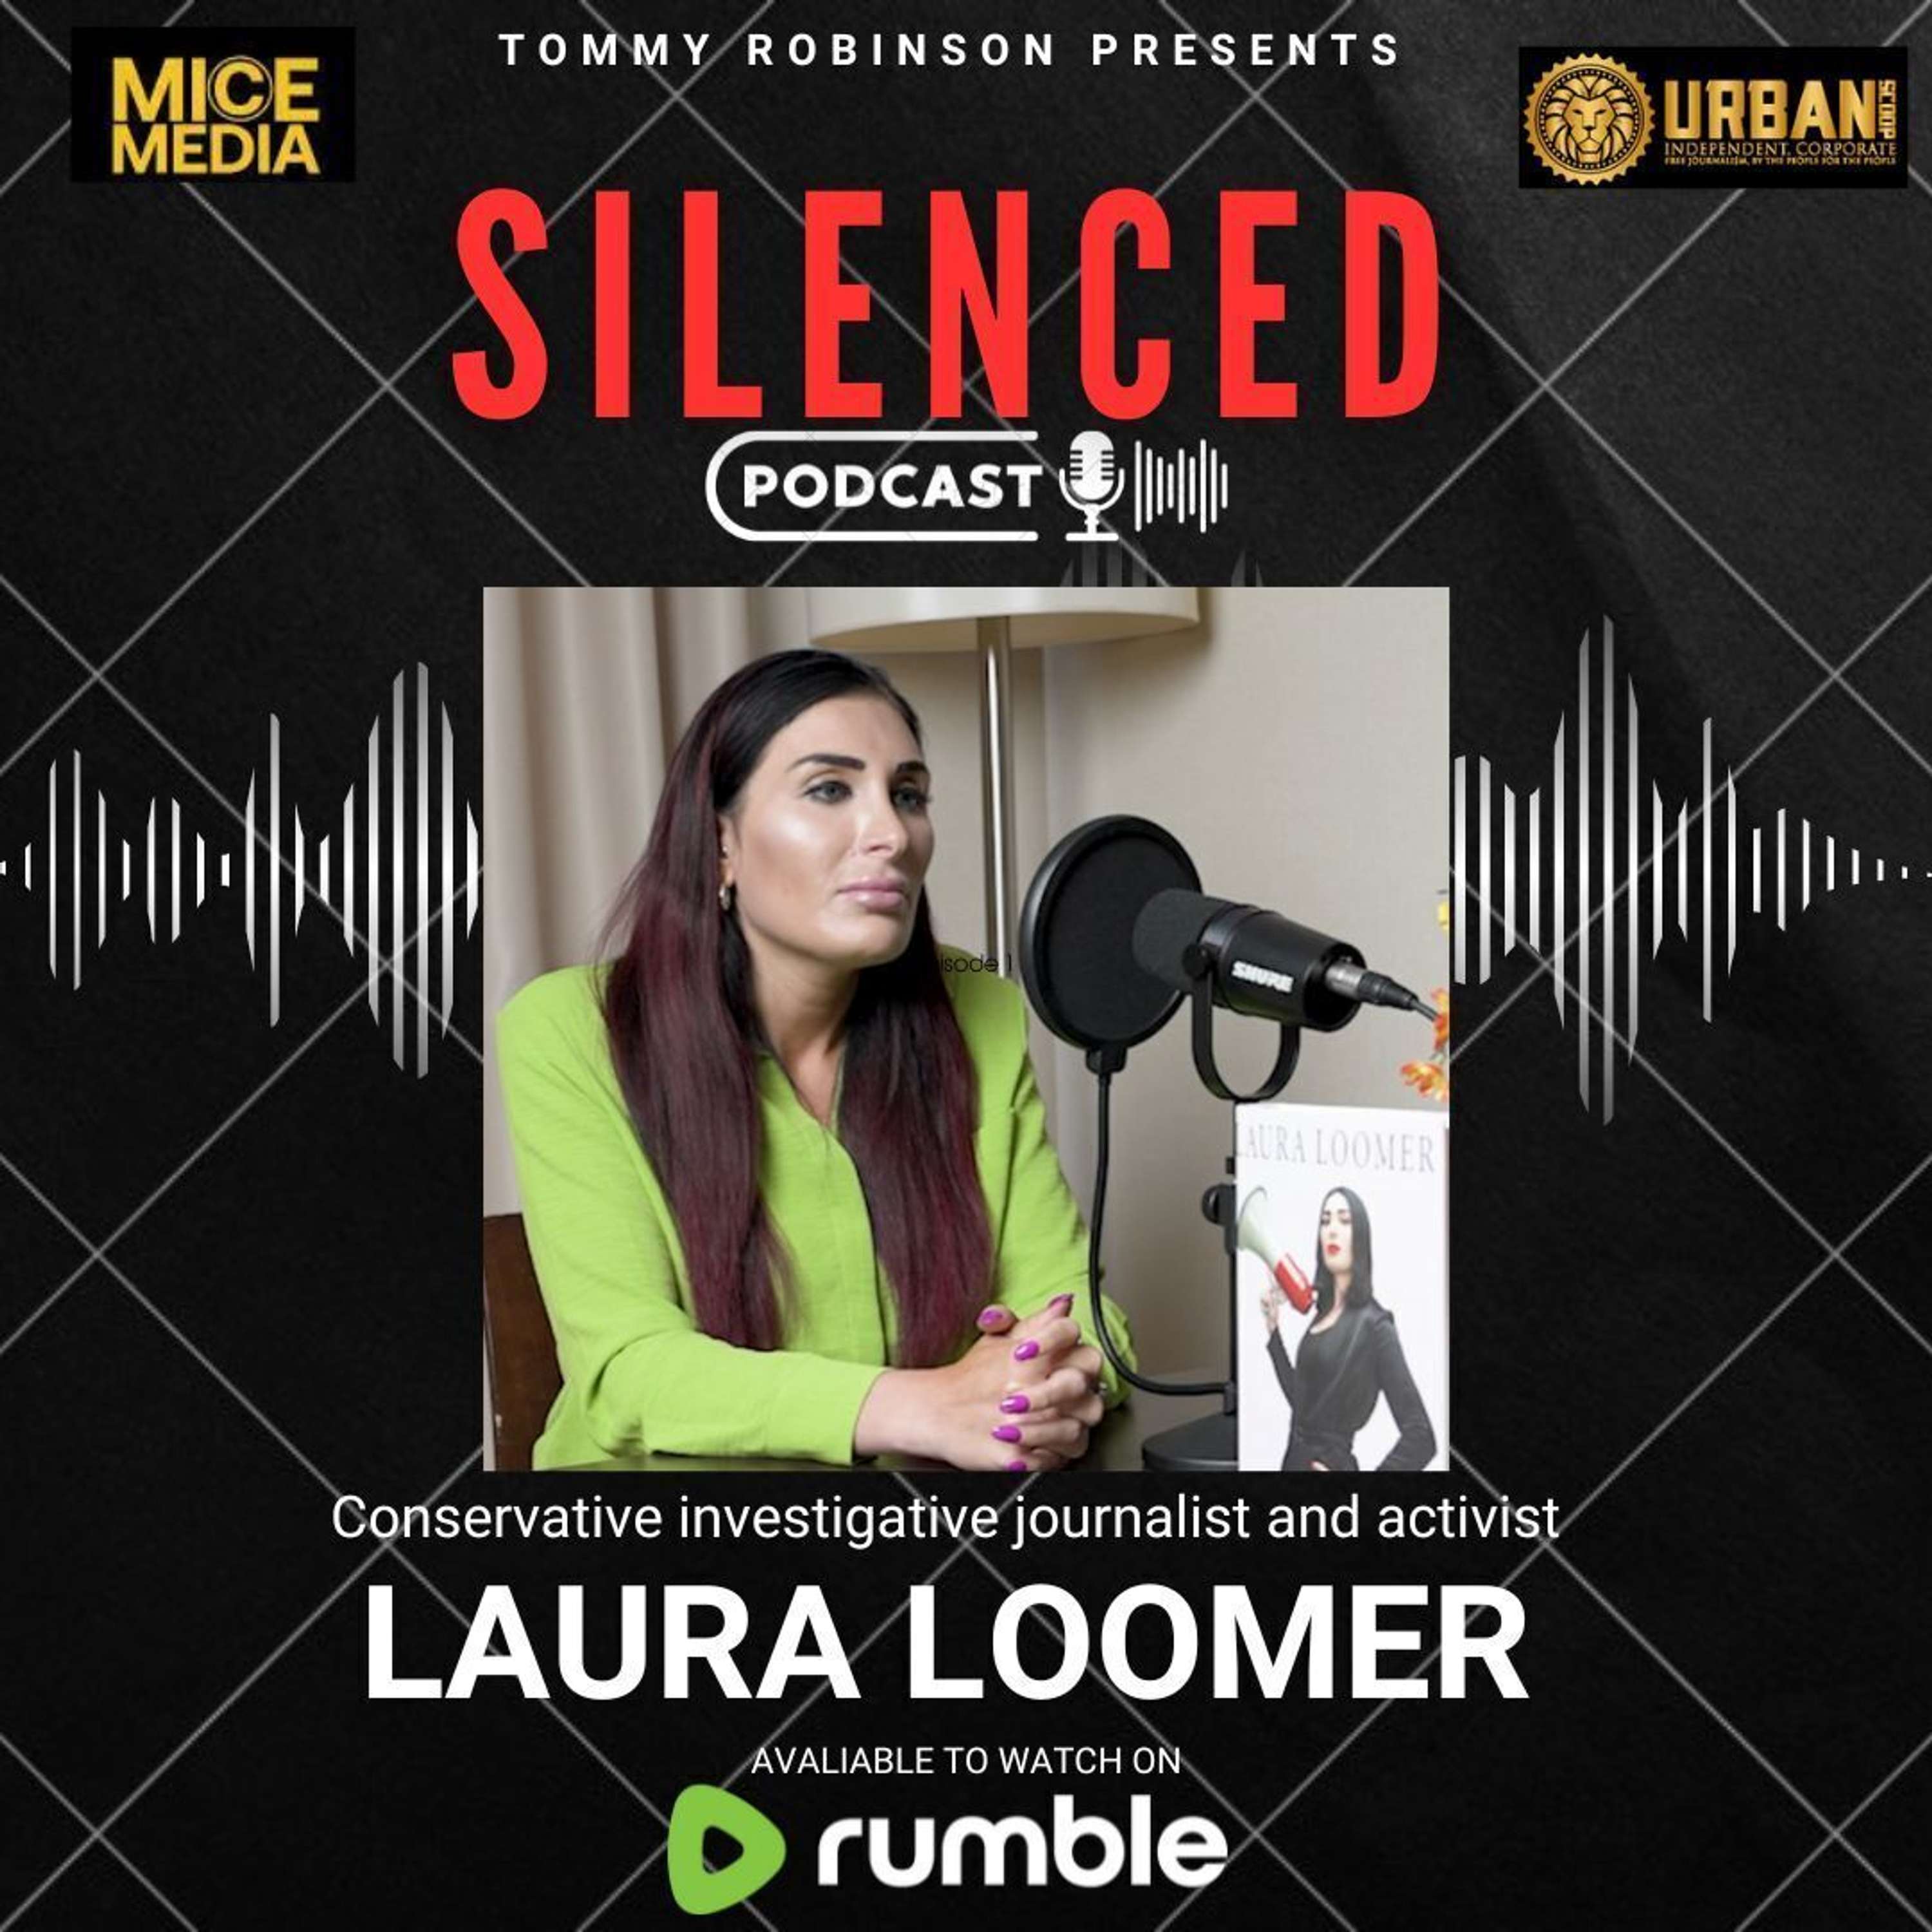 Episode 6 SILENCED with Tommy Robinson - Laura Loomer